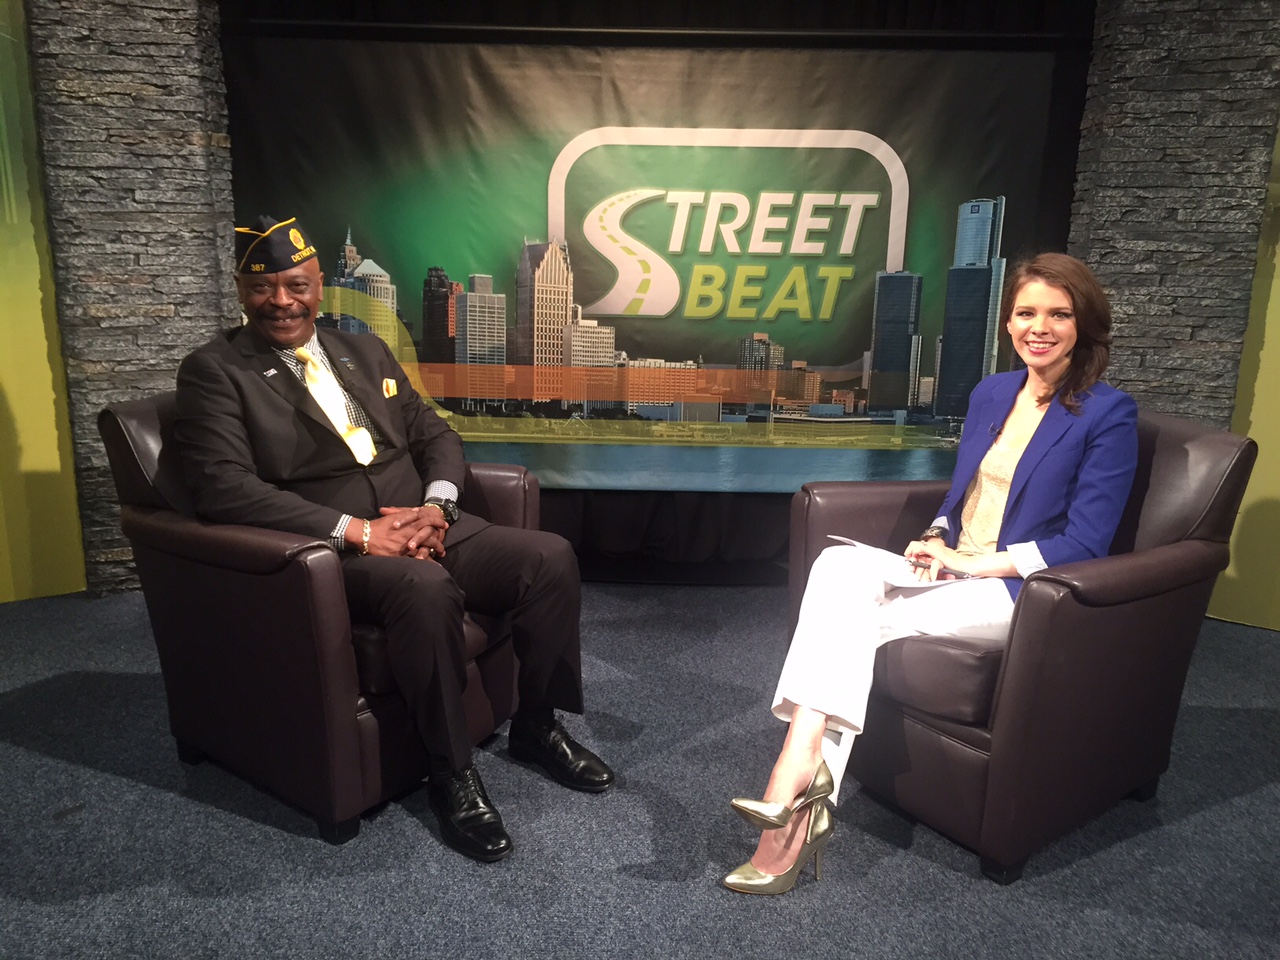 Tyrone Chatman, the Executive Director of the Michigan Veterans Foundation, talks about the housing and other issues facing our veterans with Street Beat host Karen Carter.  (credit: Sydney Bowden/CW50)